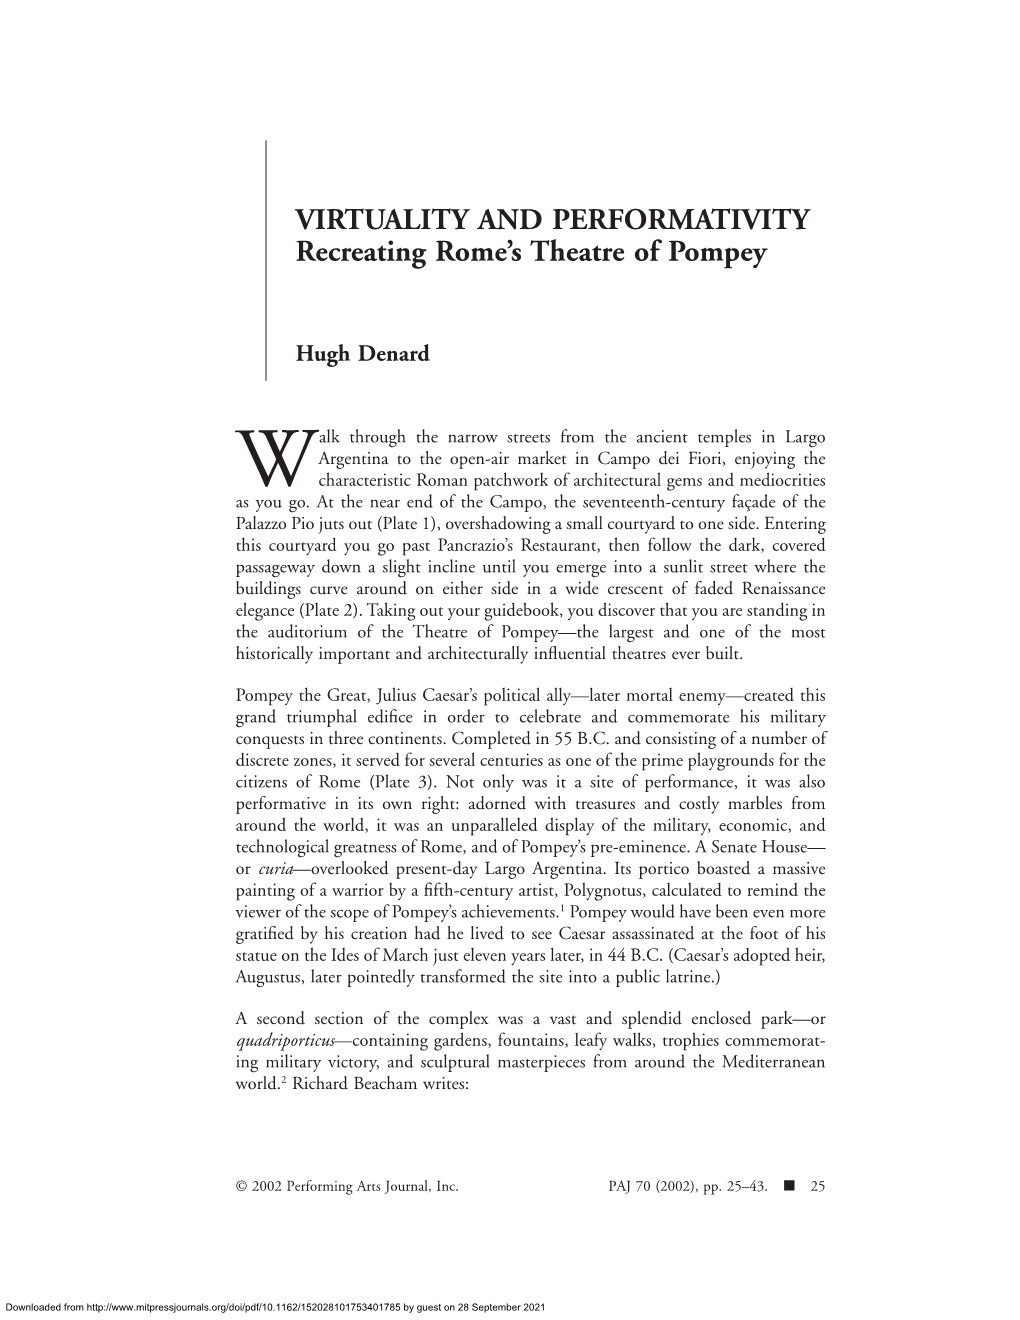 VIRTUALITY and PERFORMATIVITY Recreating Rome's Theatre Of